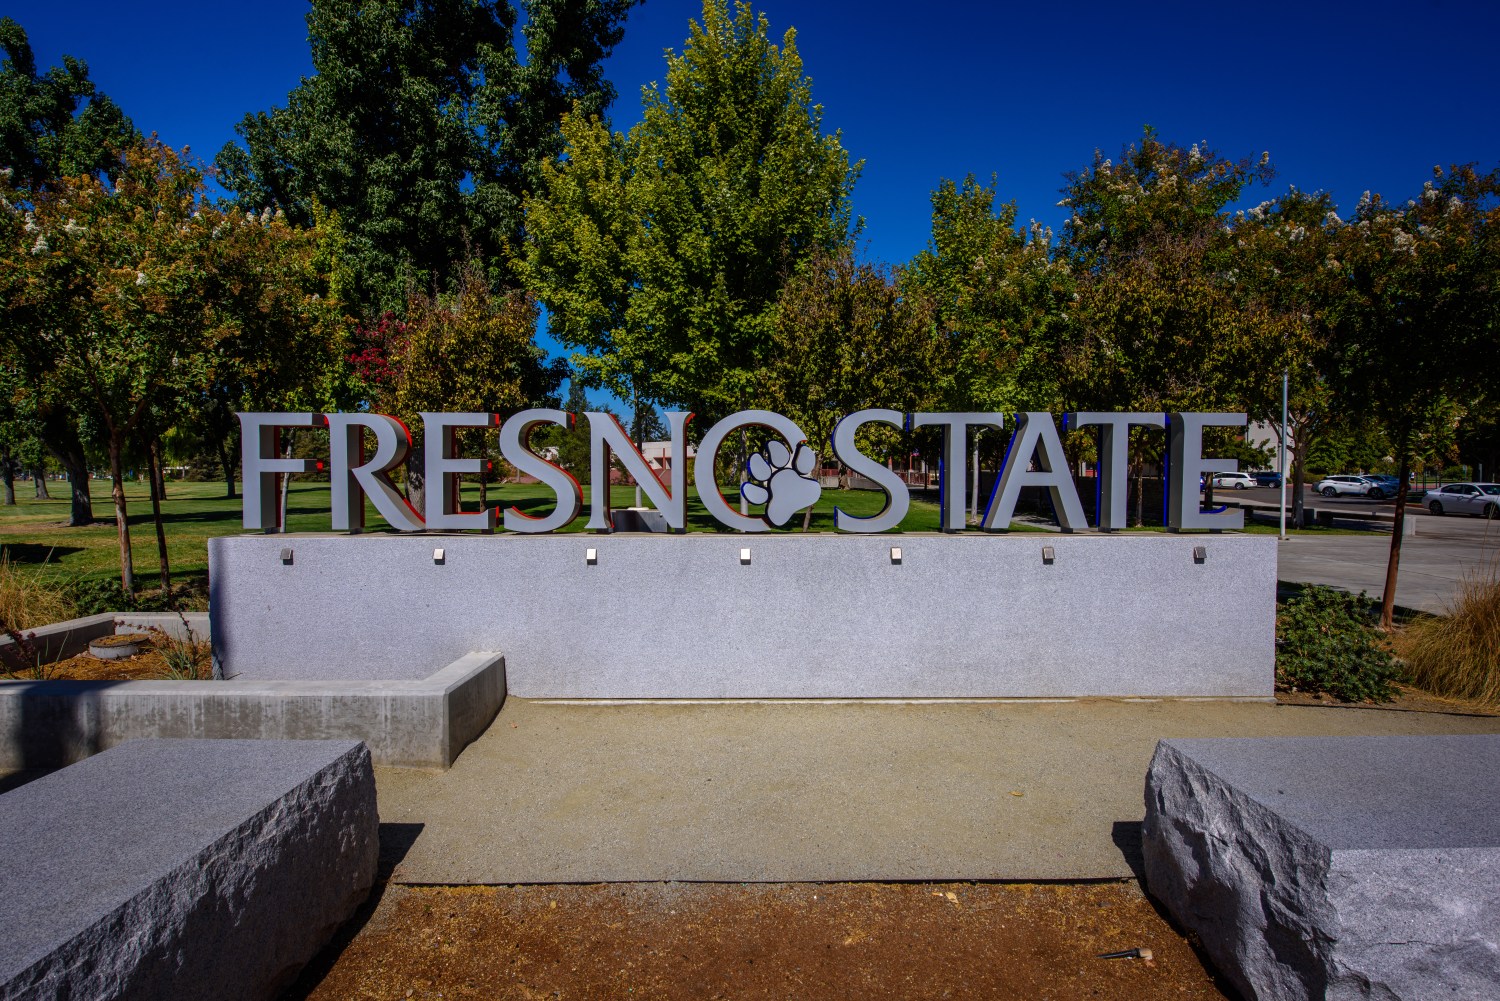 The entrance sign to the campus of Fresno State University in Fresno, California on September 14, 2018.